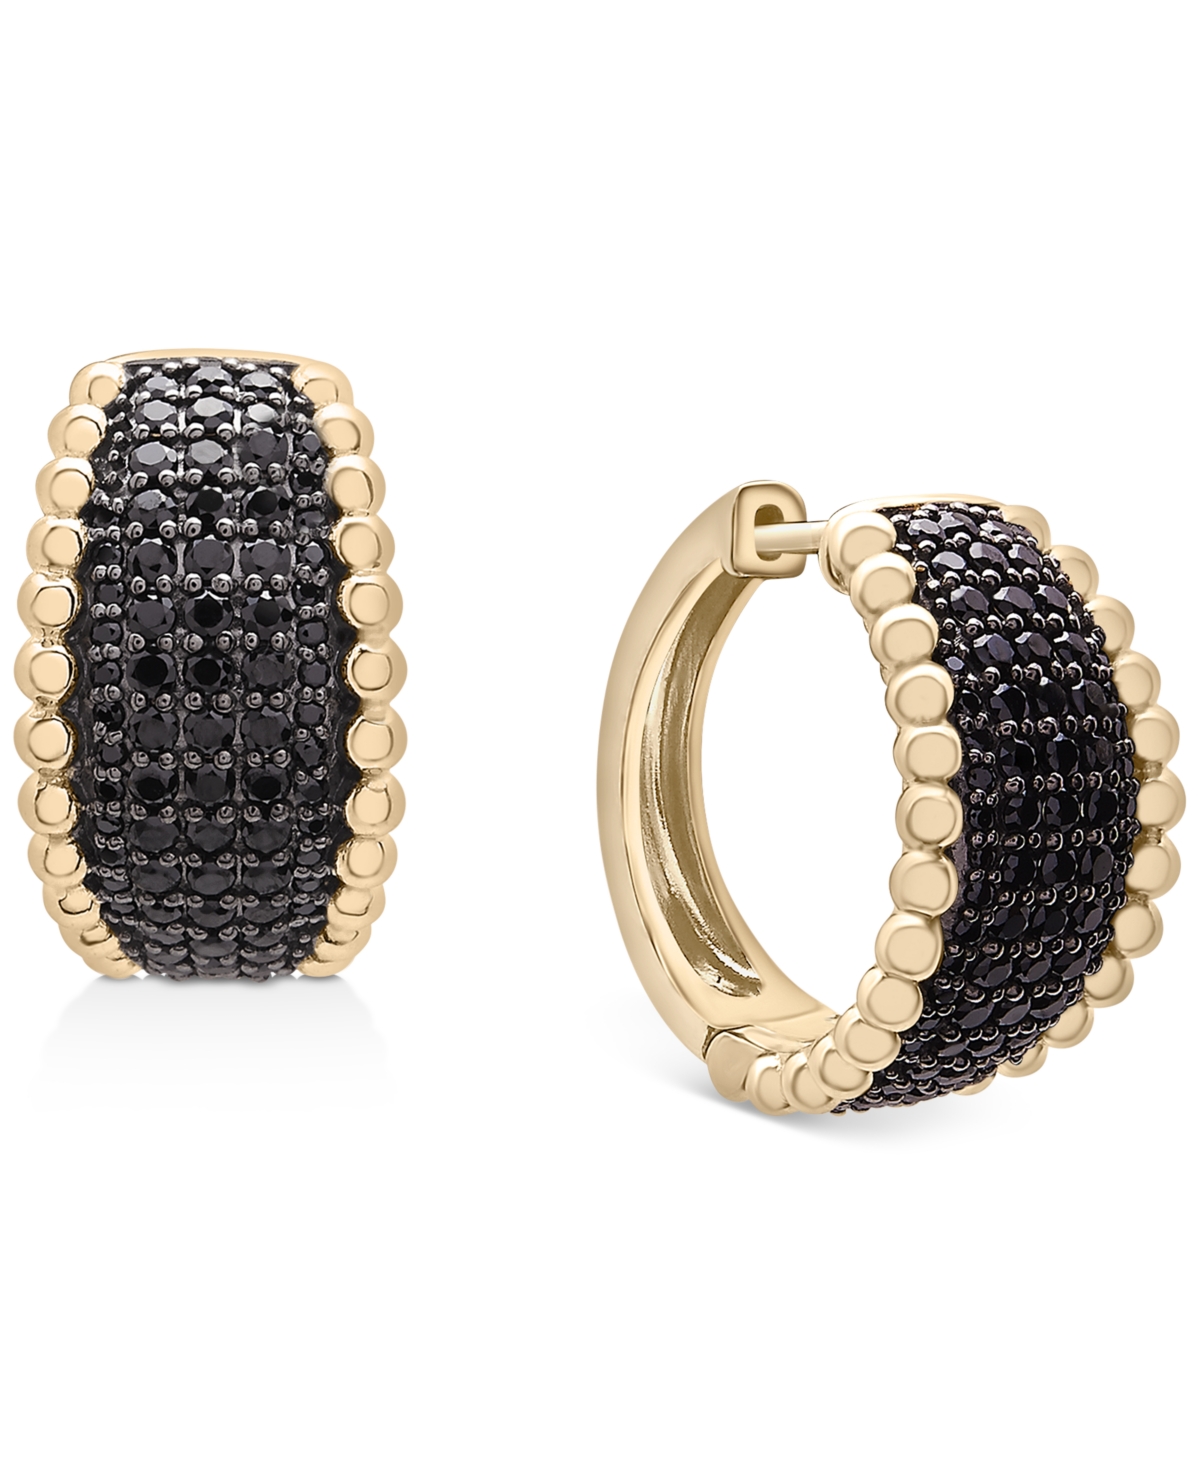 Black Diamond Bead Edge Small Hoop Earrings (1 ct. t.w.) in 14k Gold, Created for Macy's - Yellow Gold